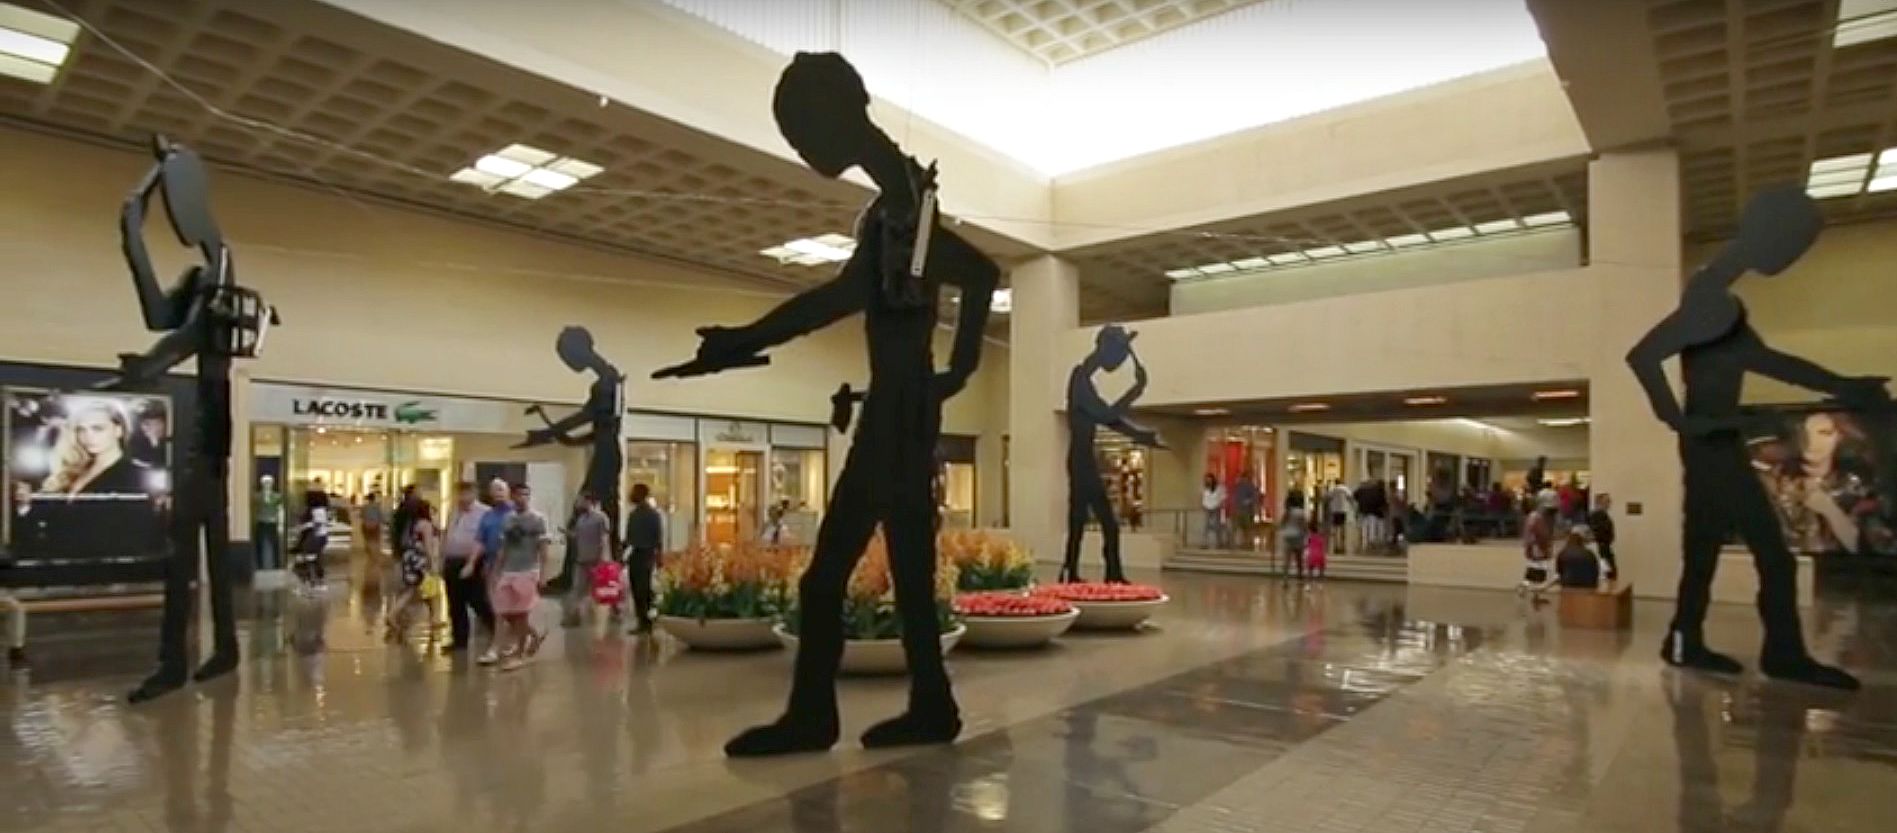 An Icon At 50: NorthPark's Architecture, Art&Seek